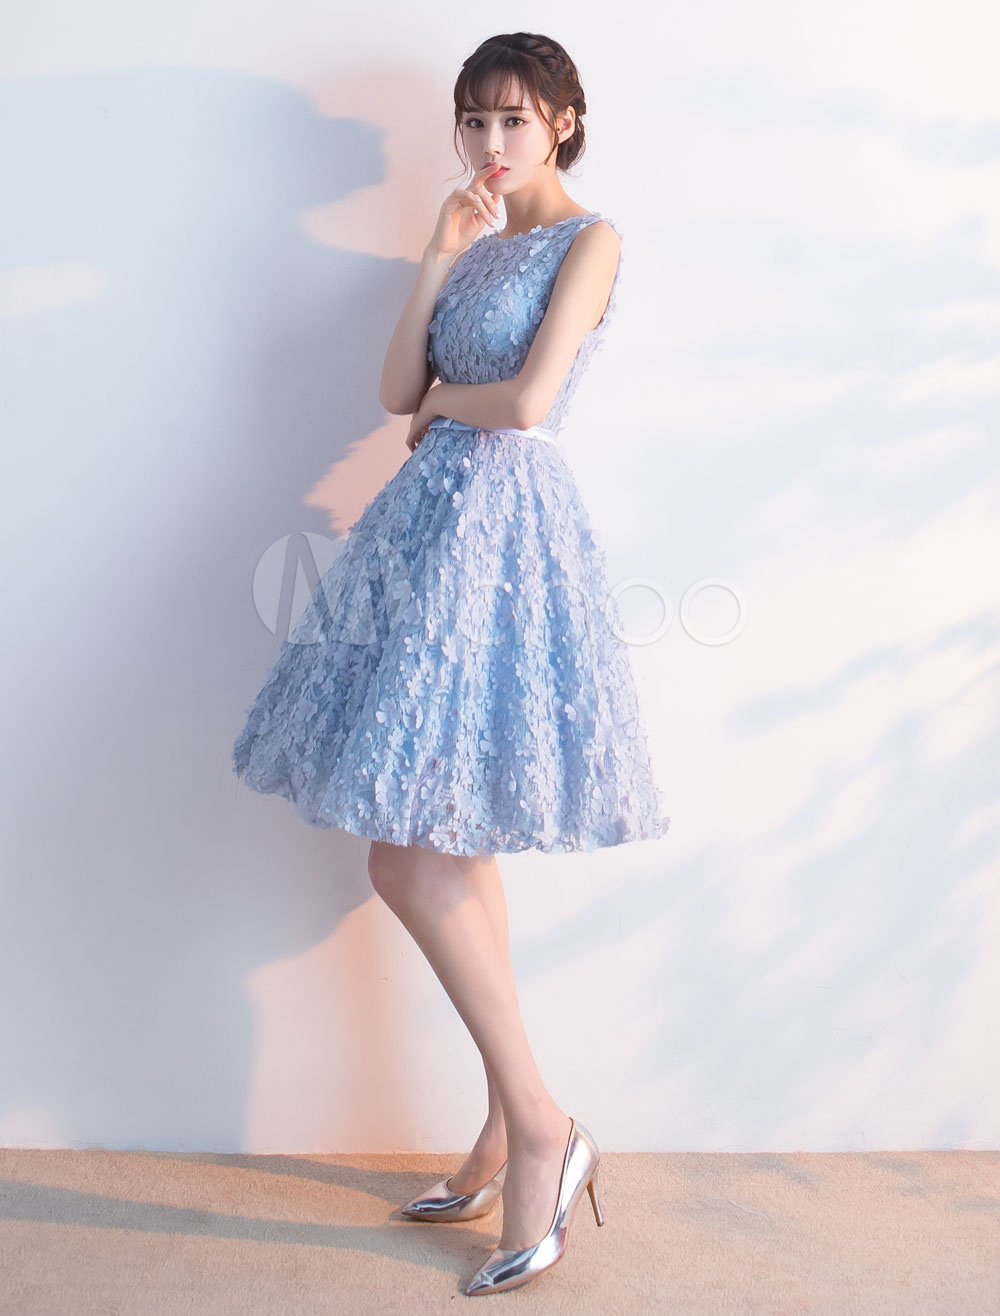 Short Prom Dresses 2020 Baby Blue Lace Flowers Homecoming Dress